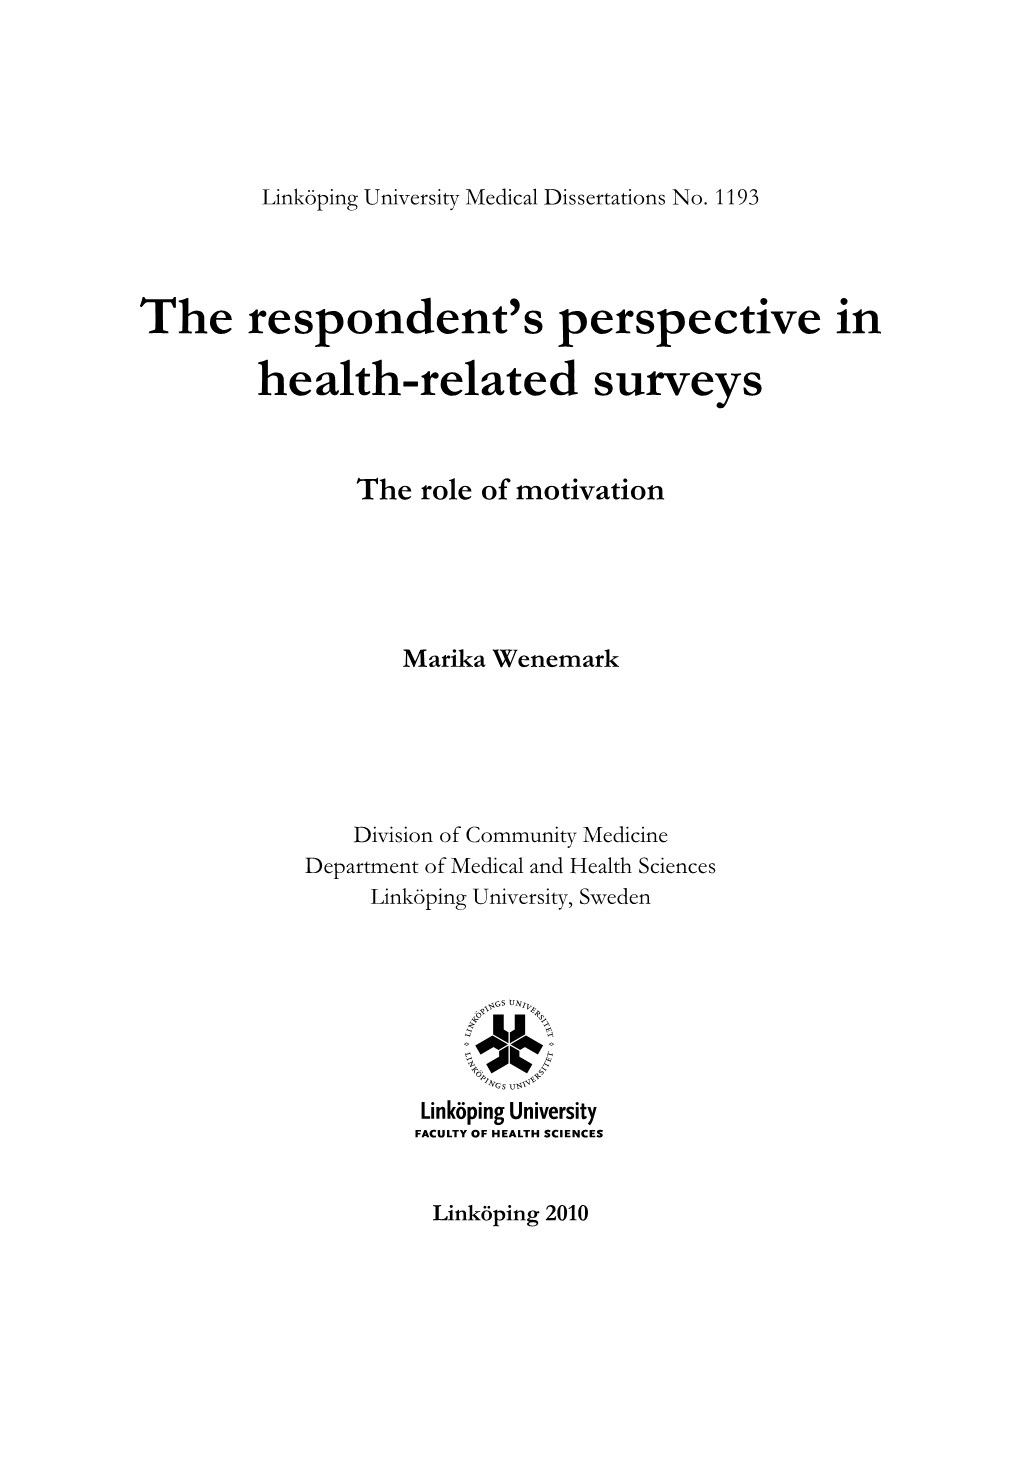 The Respondent's Perspective in Health-Related Surveys